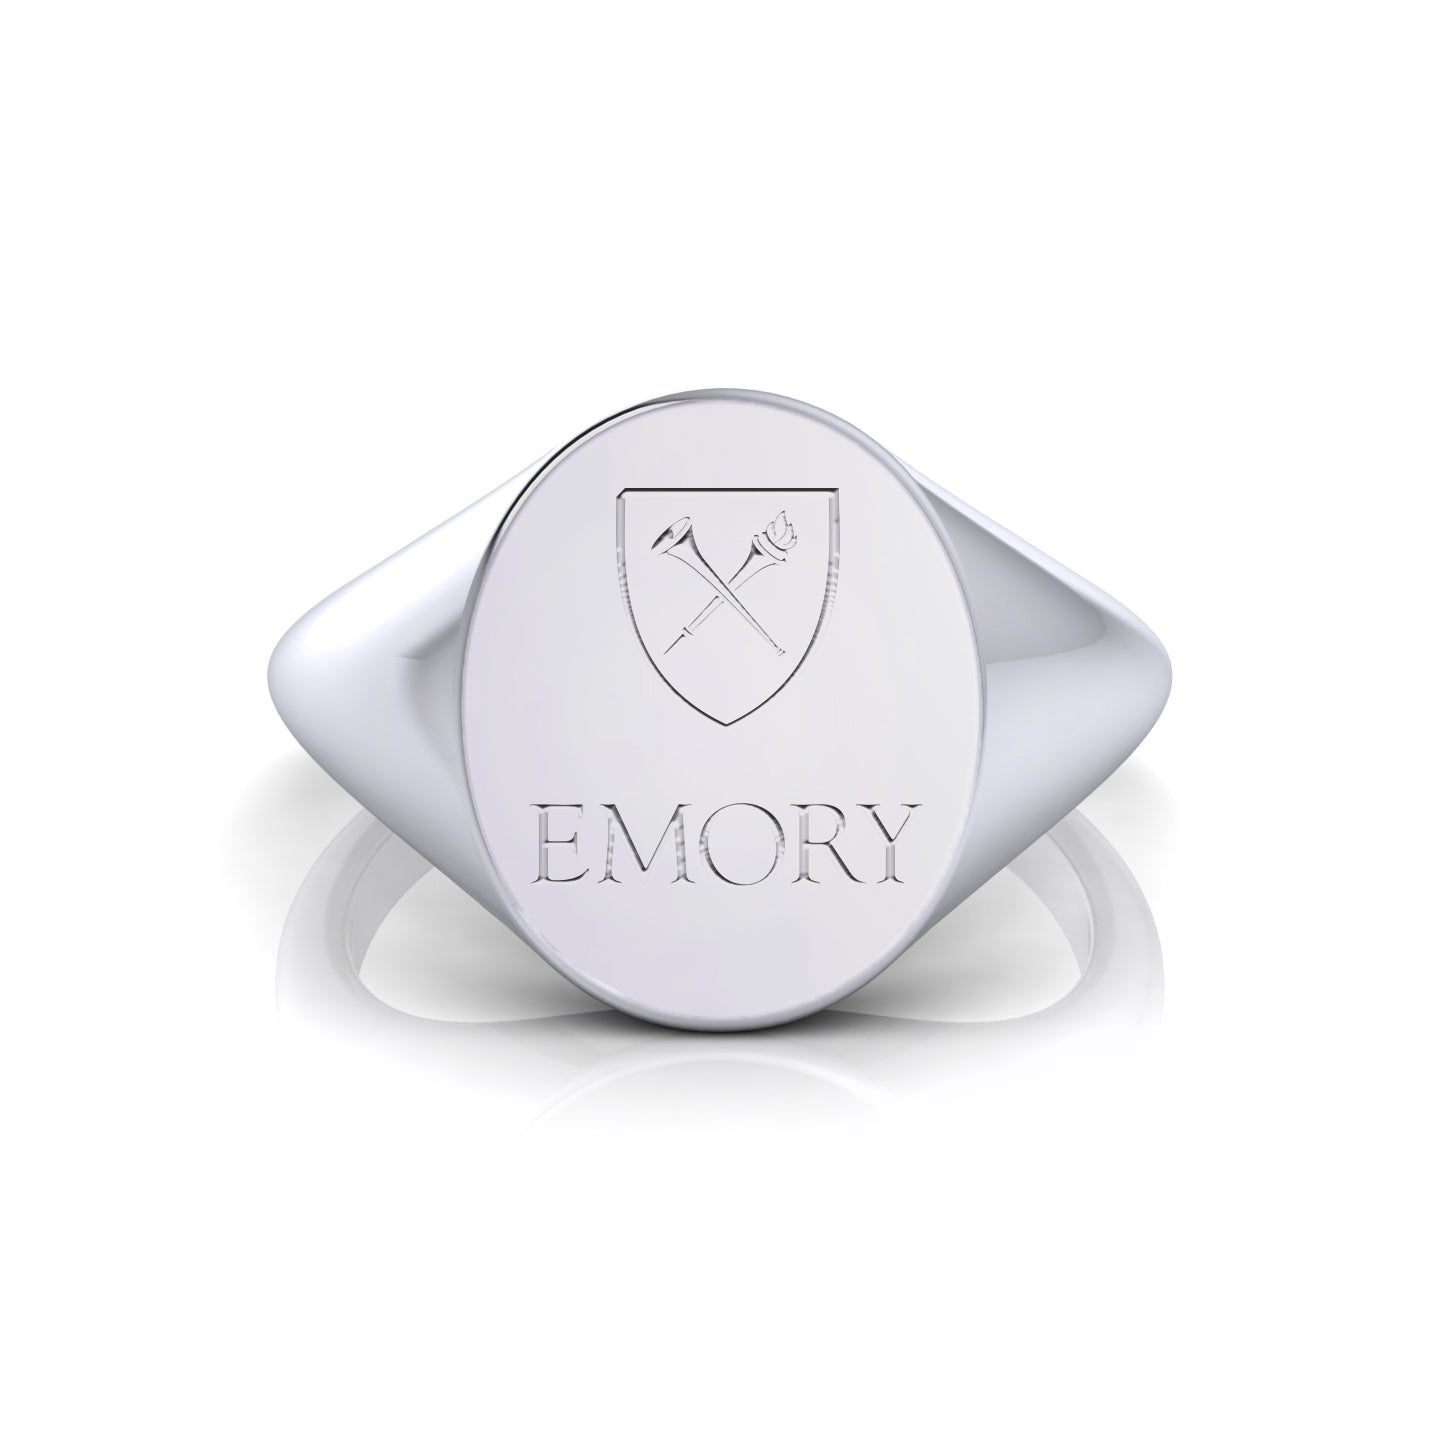 Front view of the Emory Oval Heritage Class Ring in sterling silver, displaying its sleek design and modern appeal.